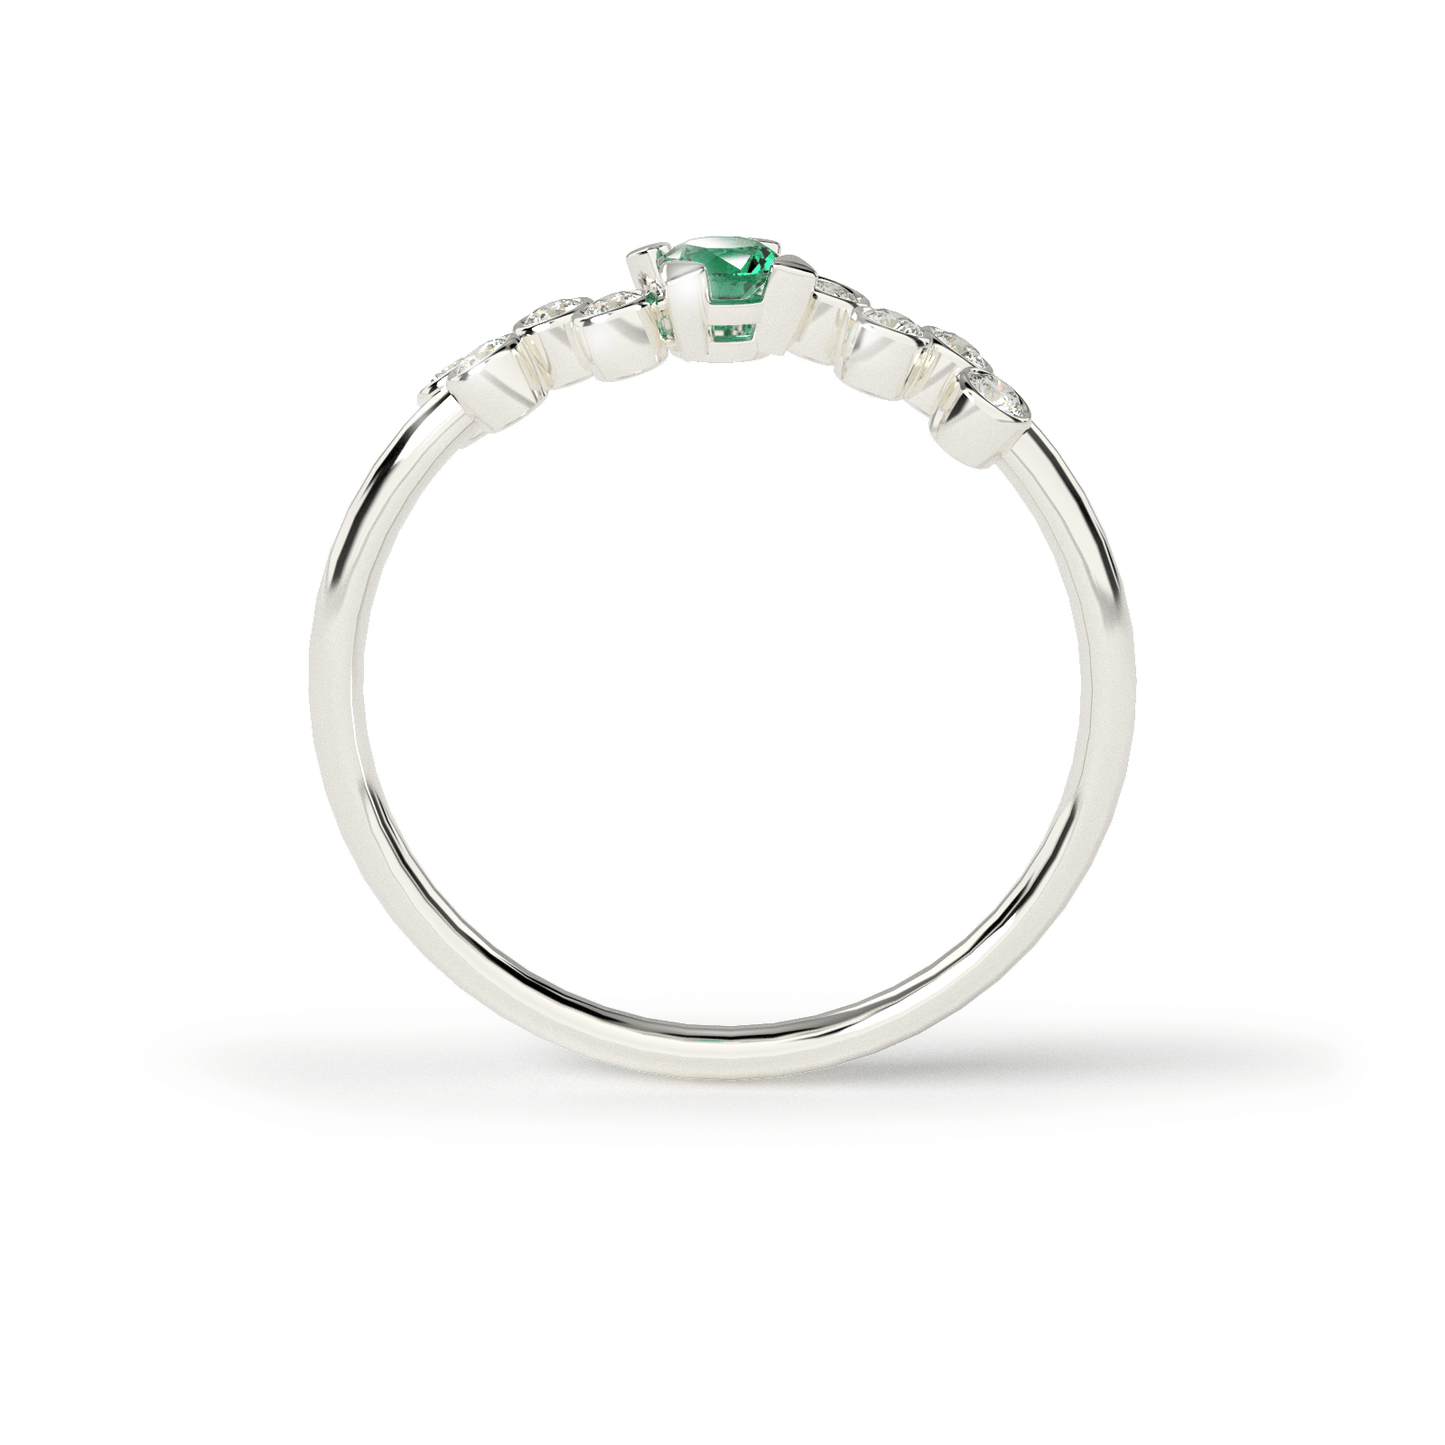 Engagement ring with 1 emerald and 8 diamonds. -Wedding Rings